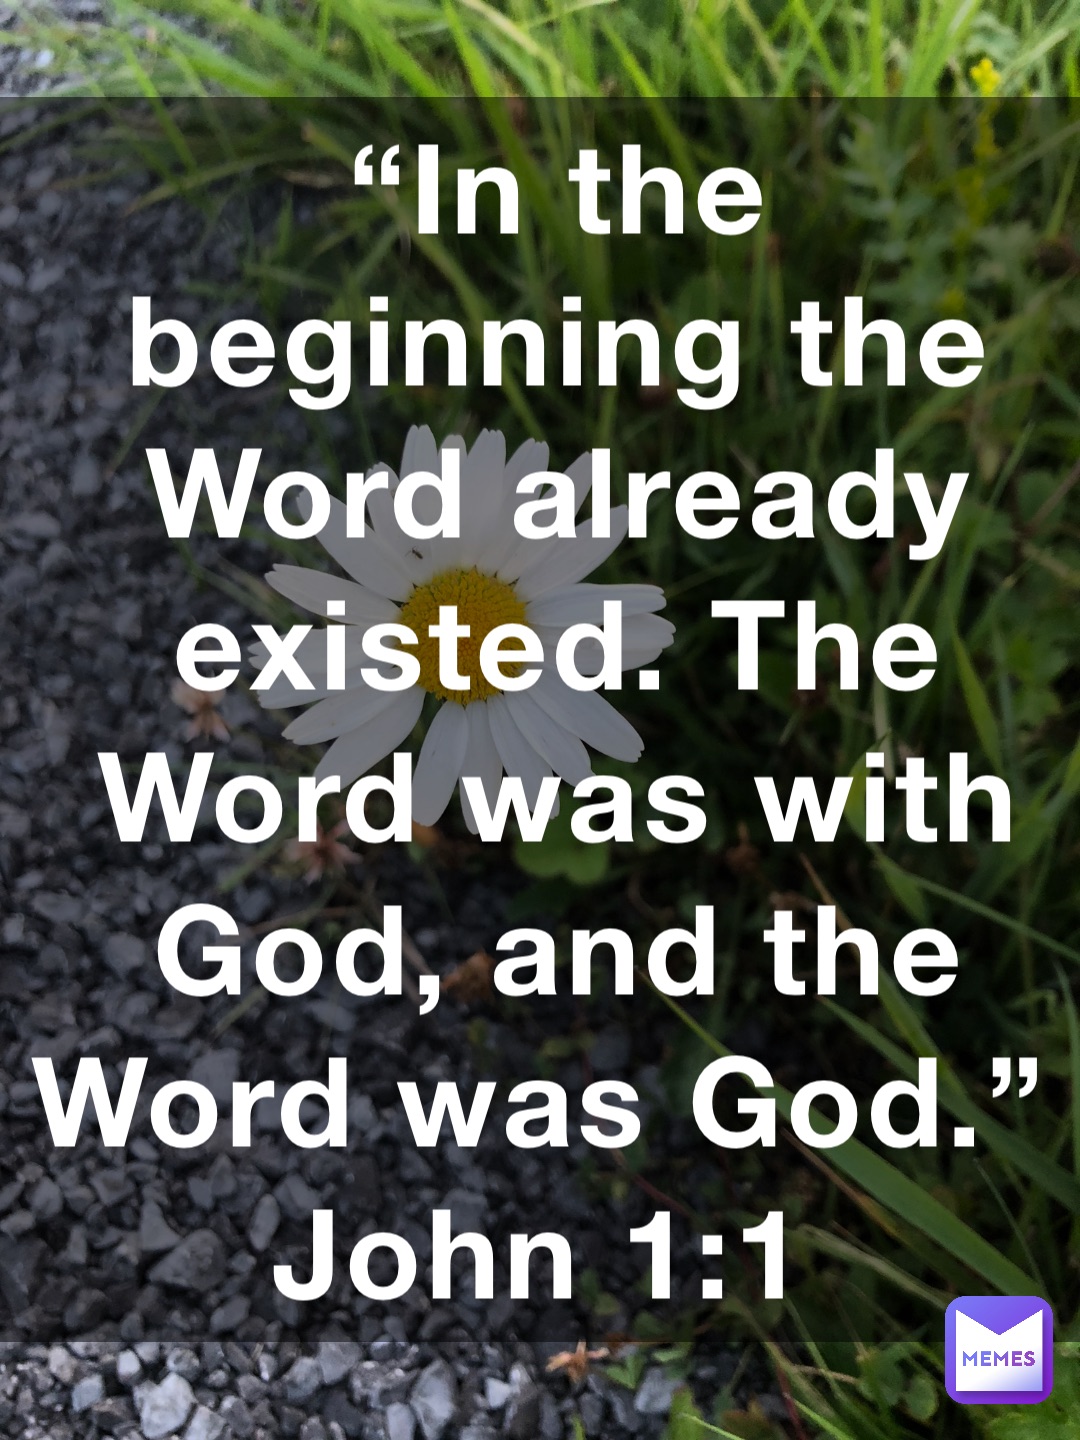 “In the beginning the Word already existed. The Word was with God, and the Word was God.”
‭‭John‬ ‭1‬:‭1‬ ‭